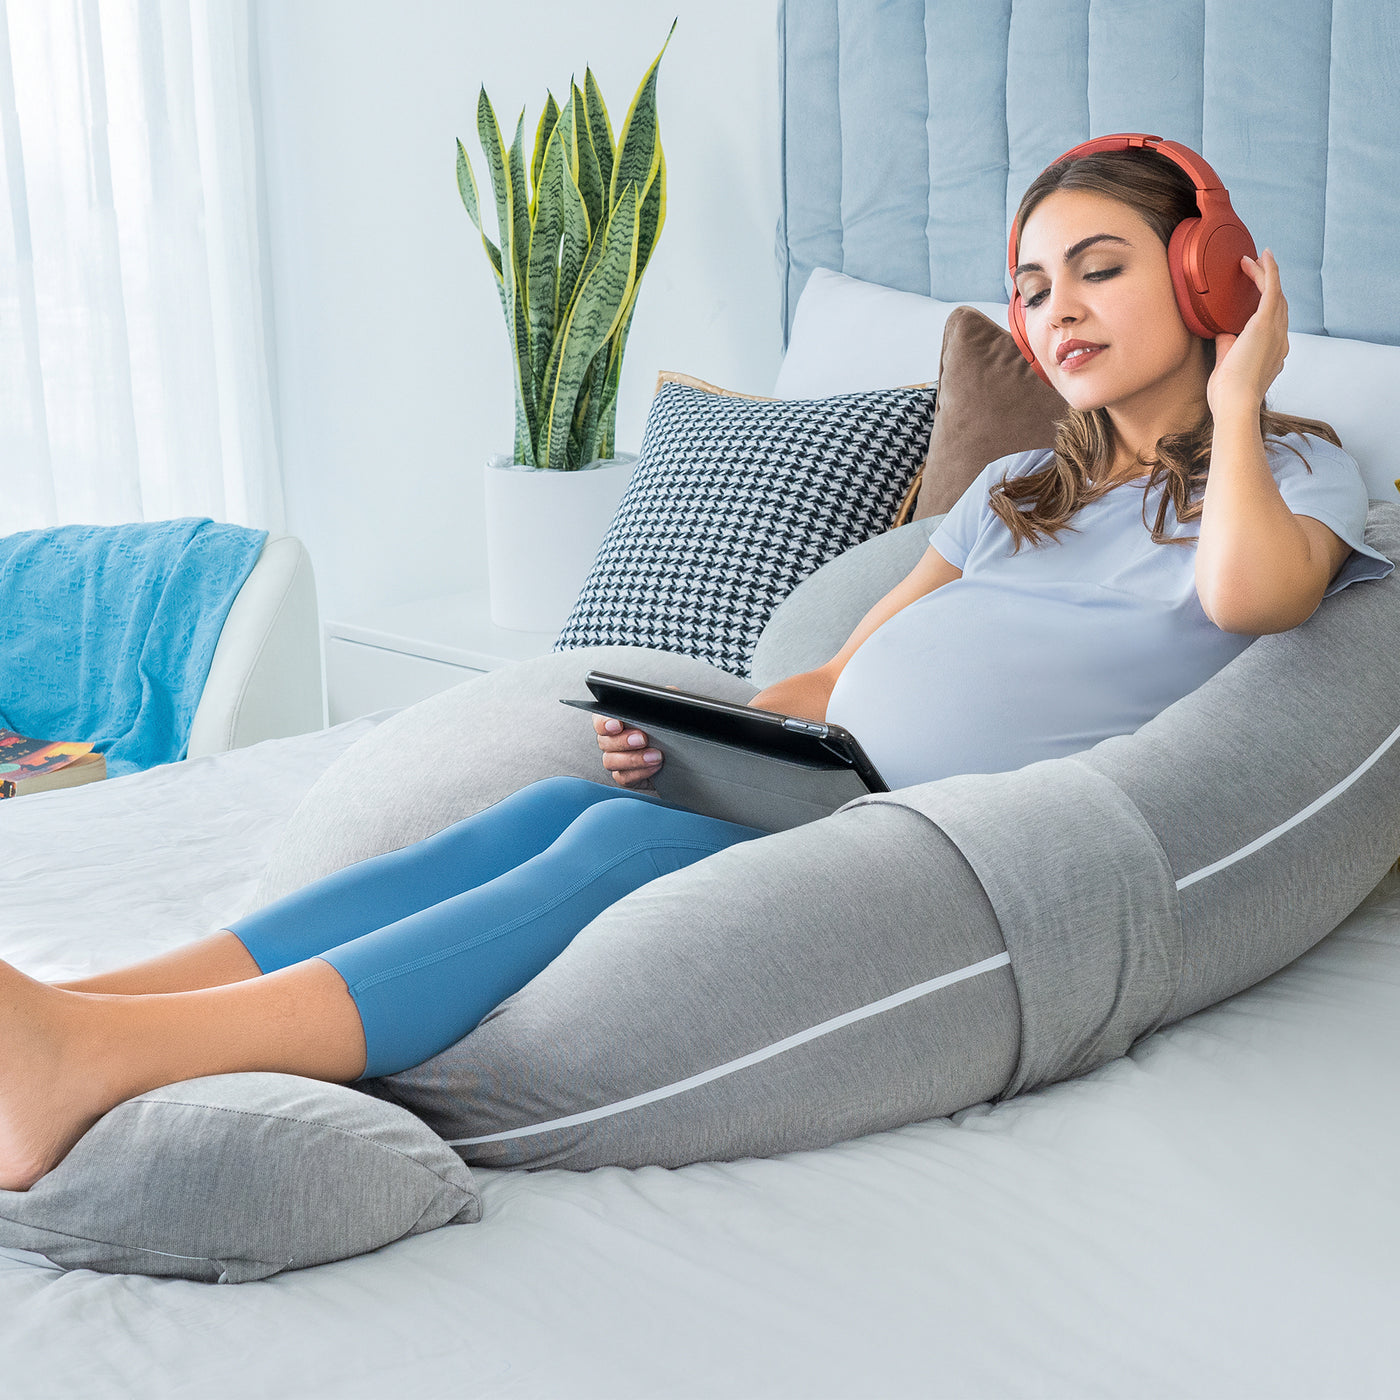 E-Shaped Pregnancy Pillow, Silky Cooling Jersey